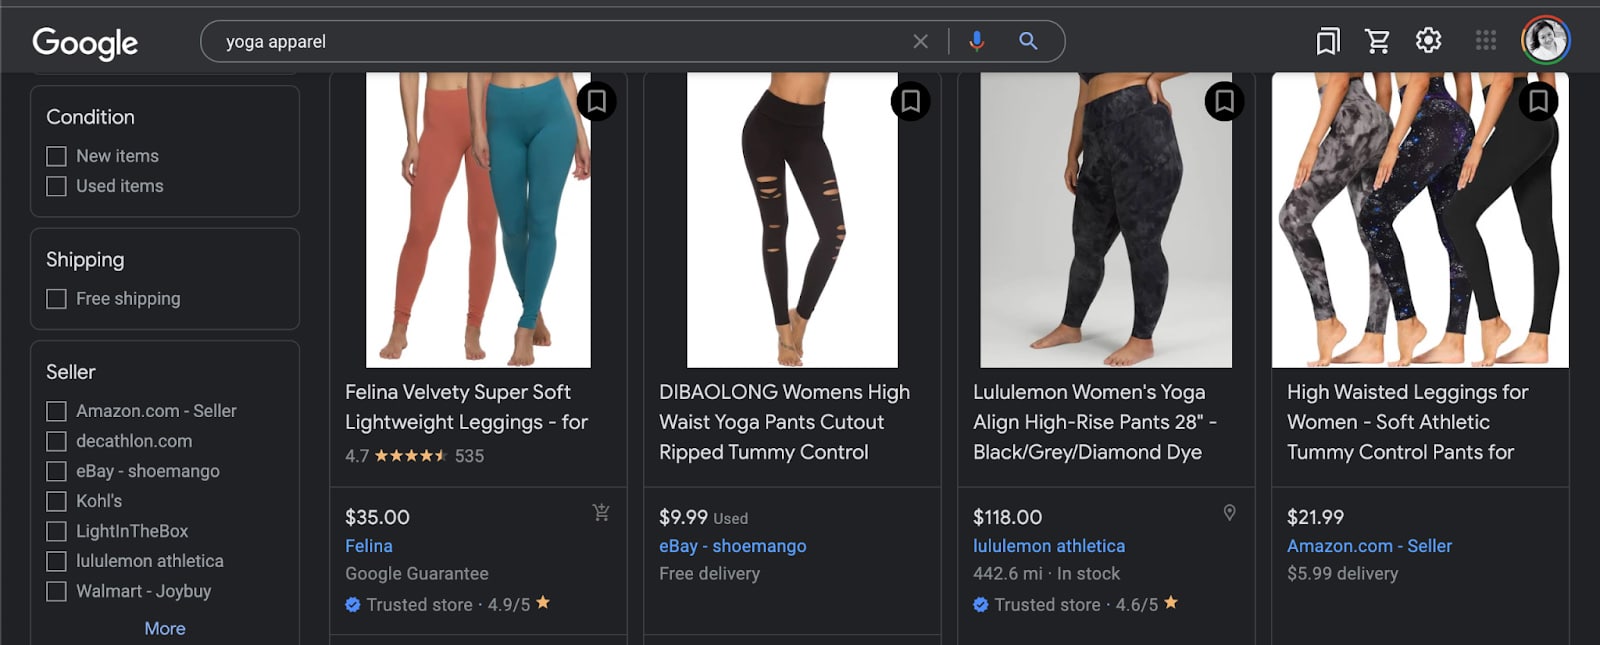 Google Shopping sample products.